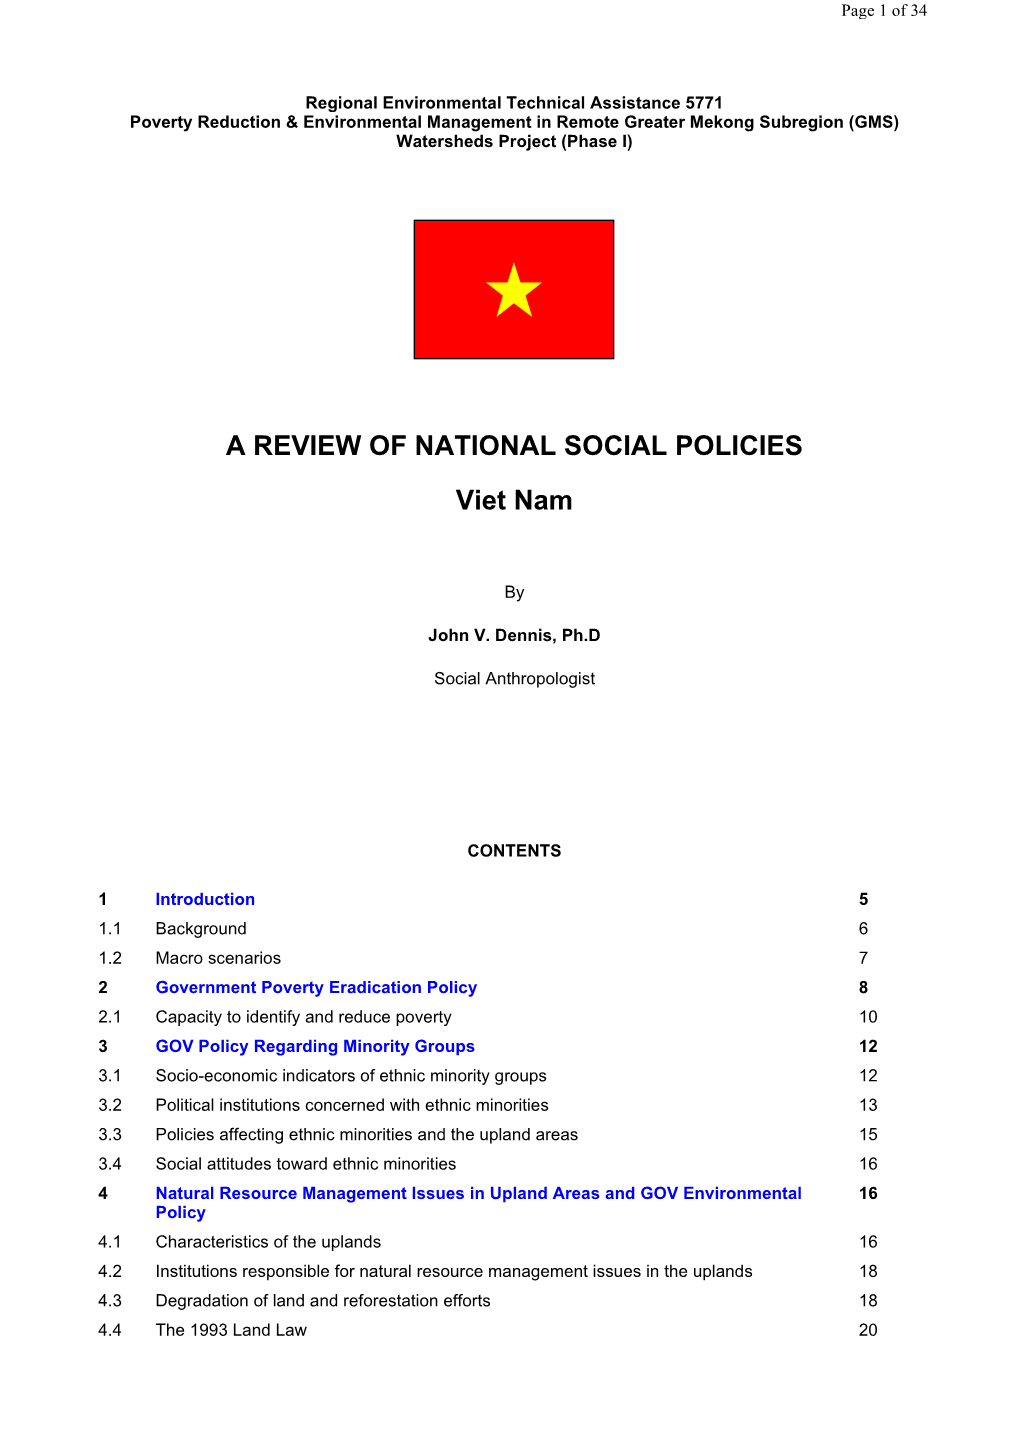 A REVIEW of NATIONAL SOCIAL POLICIES Viet Nam